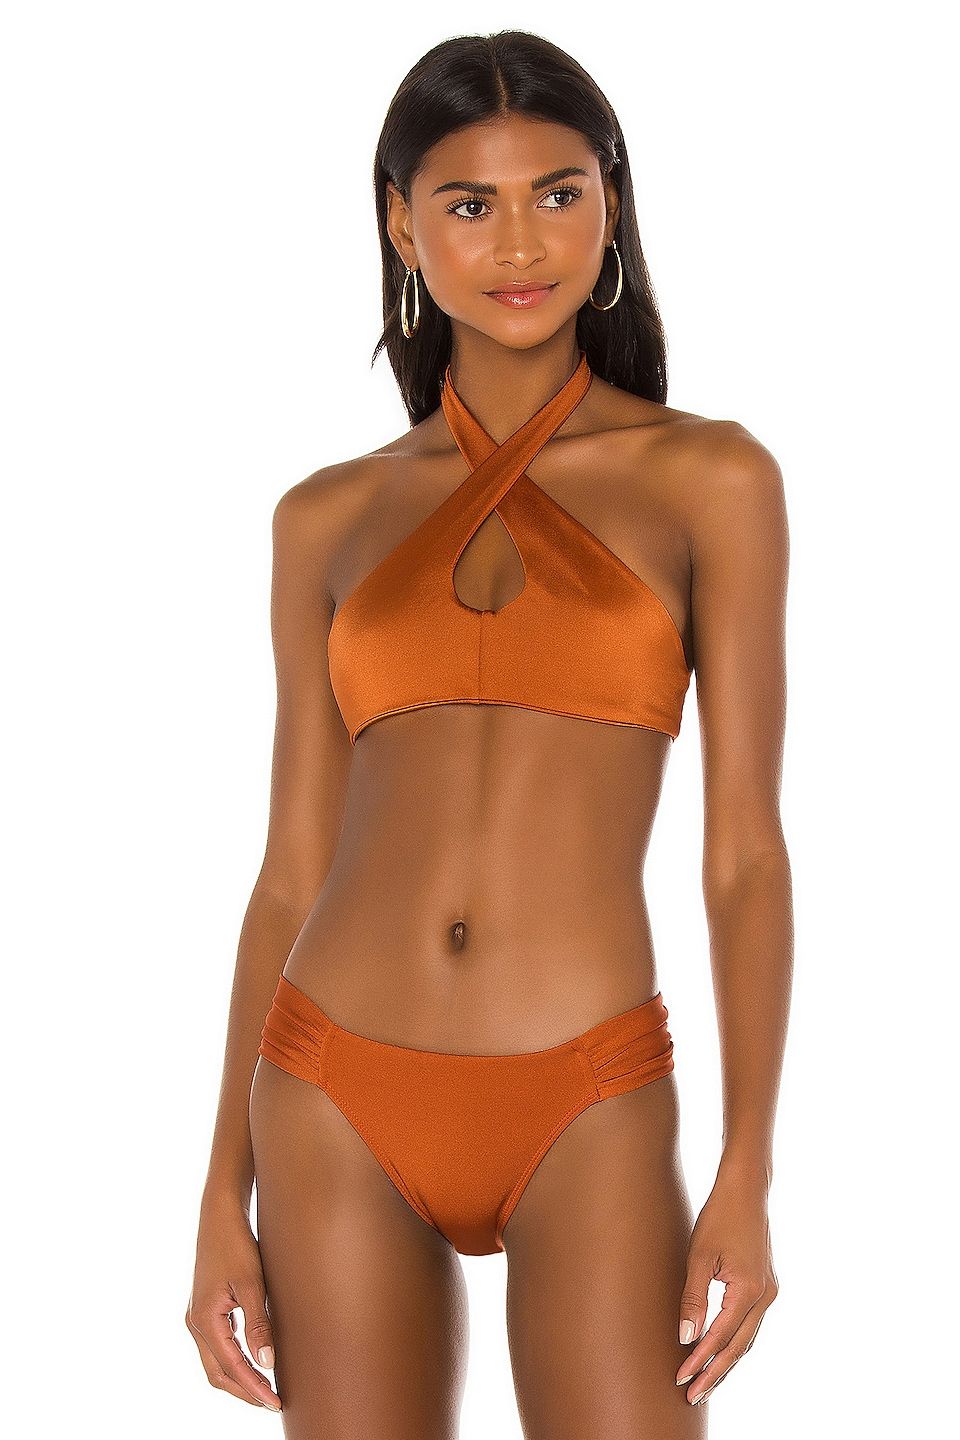 Best Swimsuits For Small Busts From